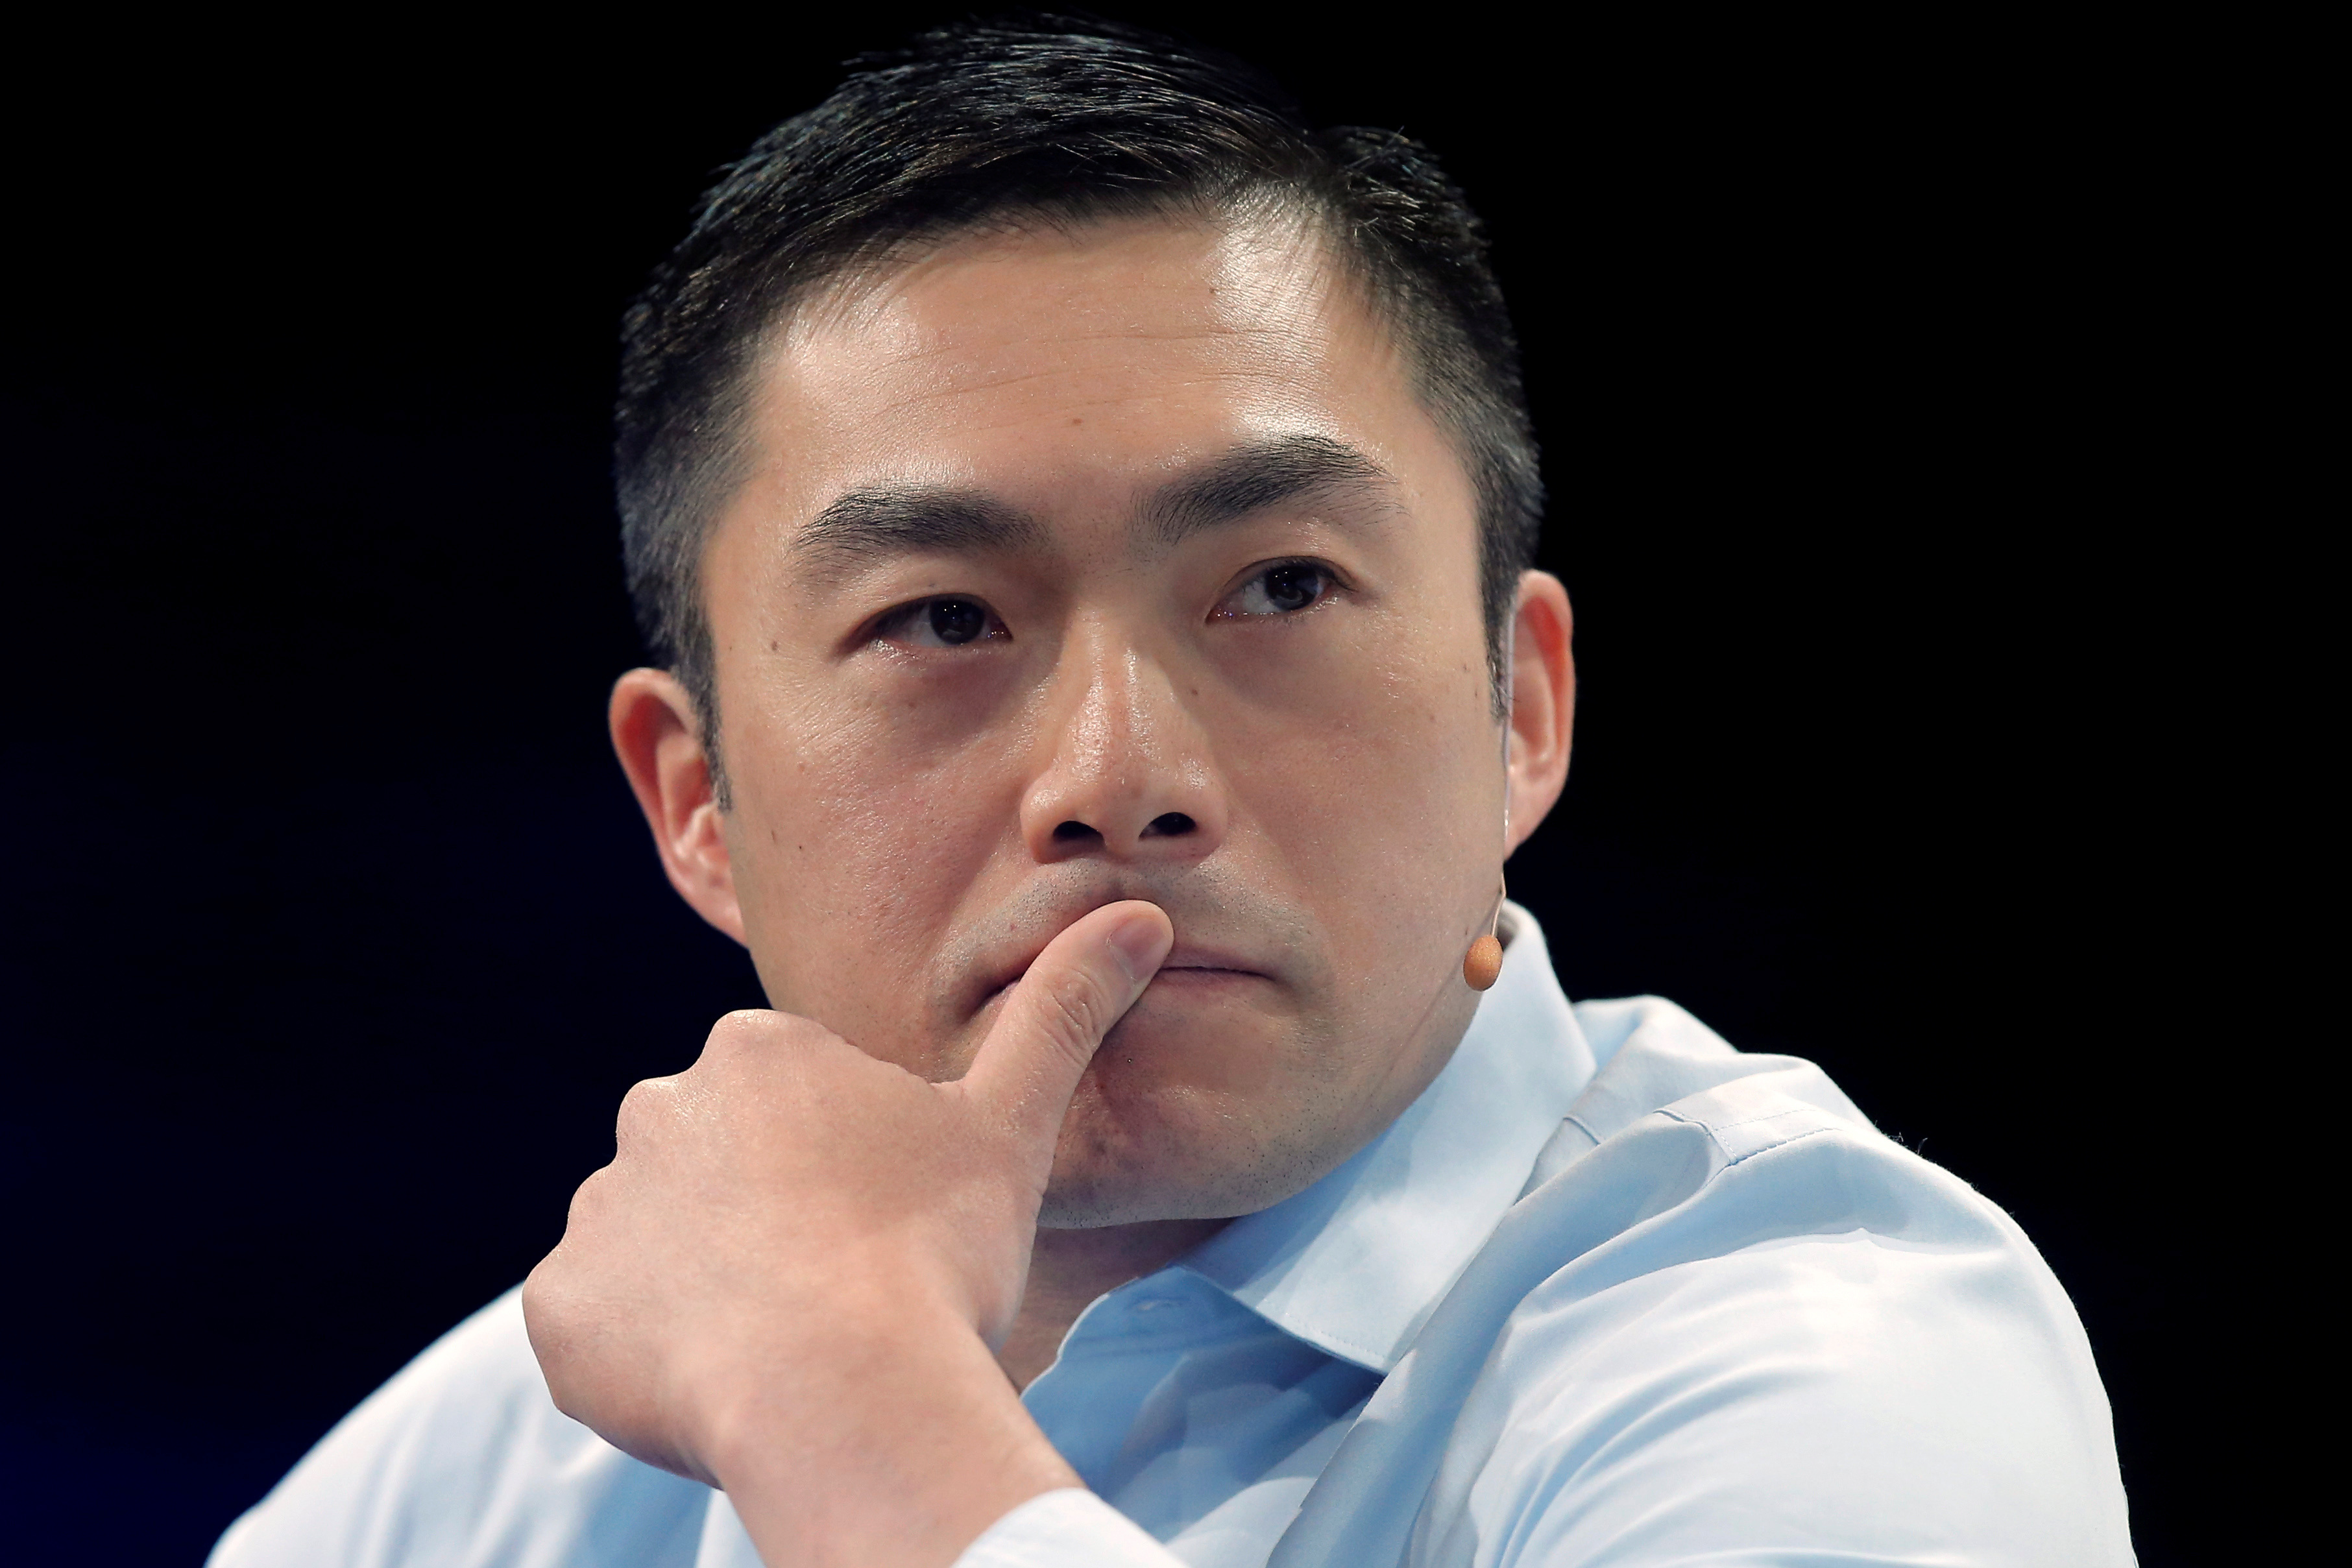 Alfred Lin, a venture capitalist at Sequoia Capital, looks on during the TechCrunch Disrupt event in Brooklyn borough of New York